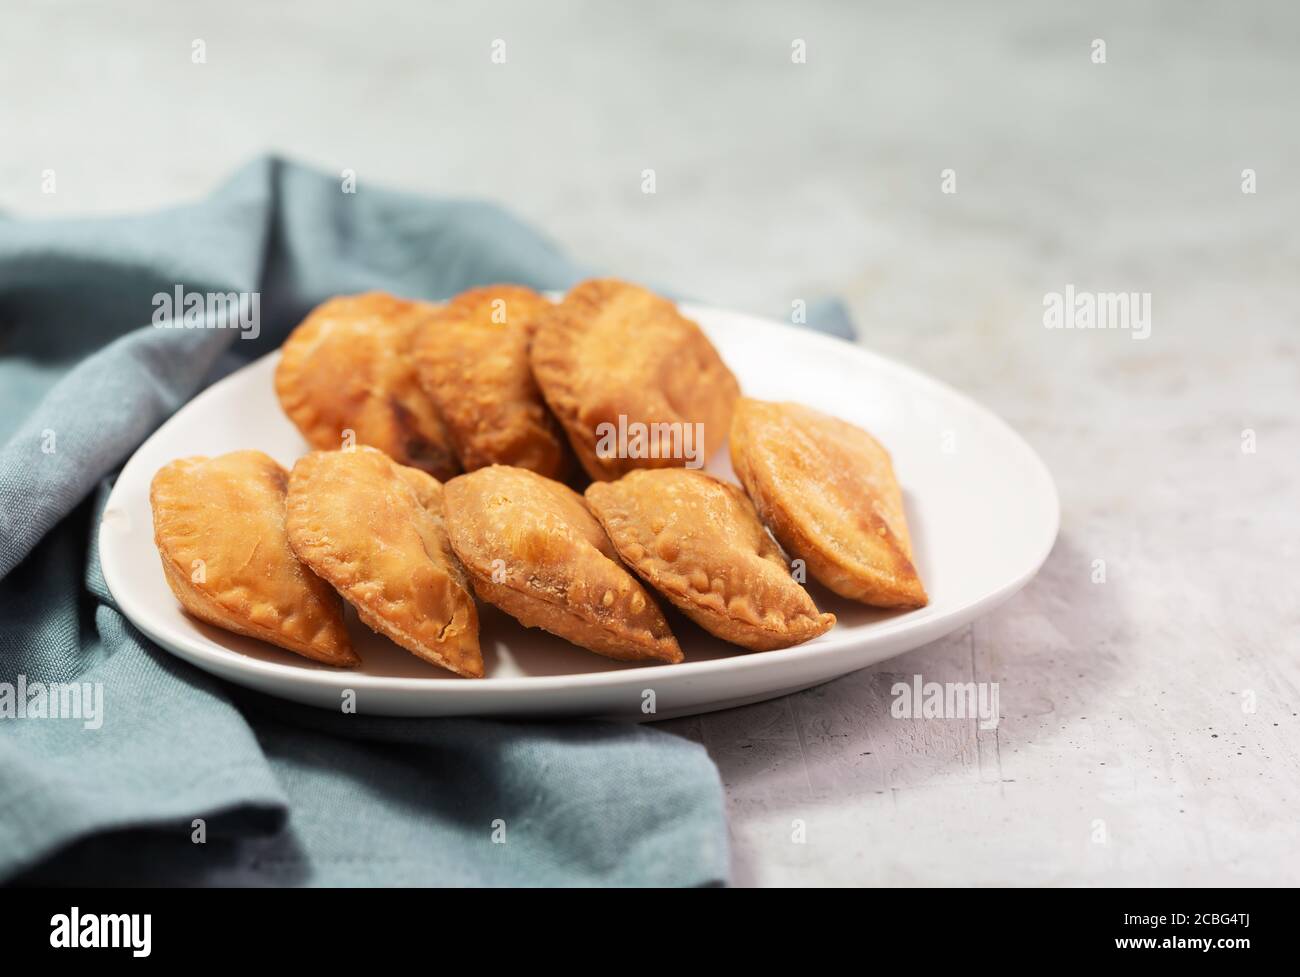 Typical Colombian empanadas usually served with spicy sauce on concrete surface Stock Photo